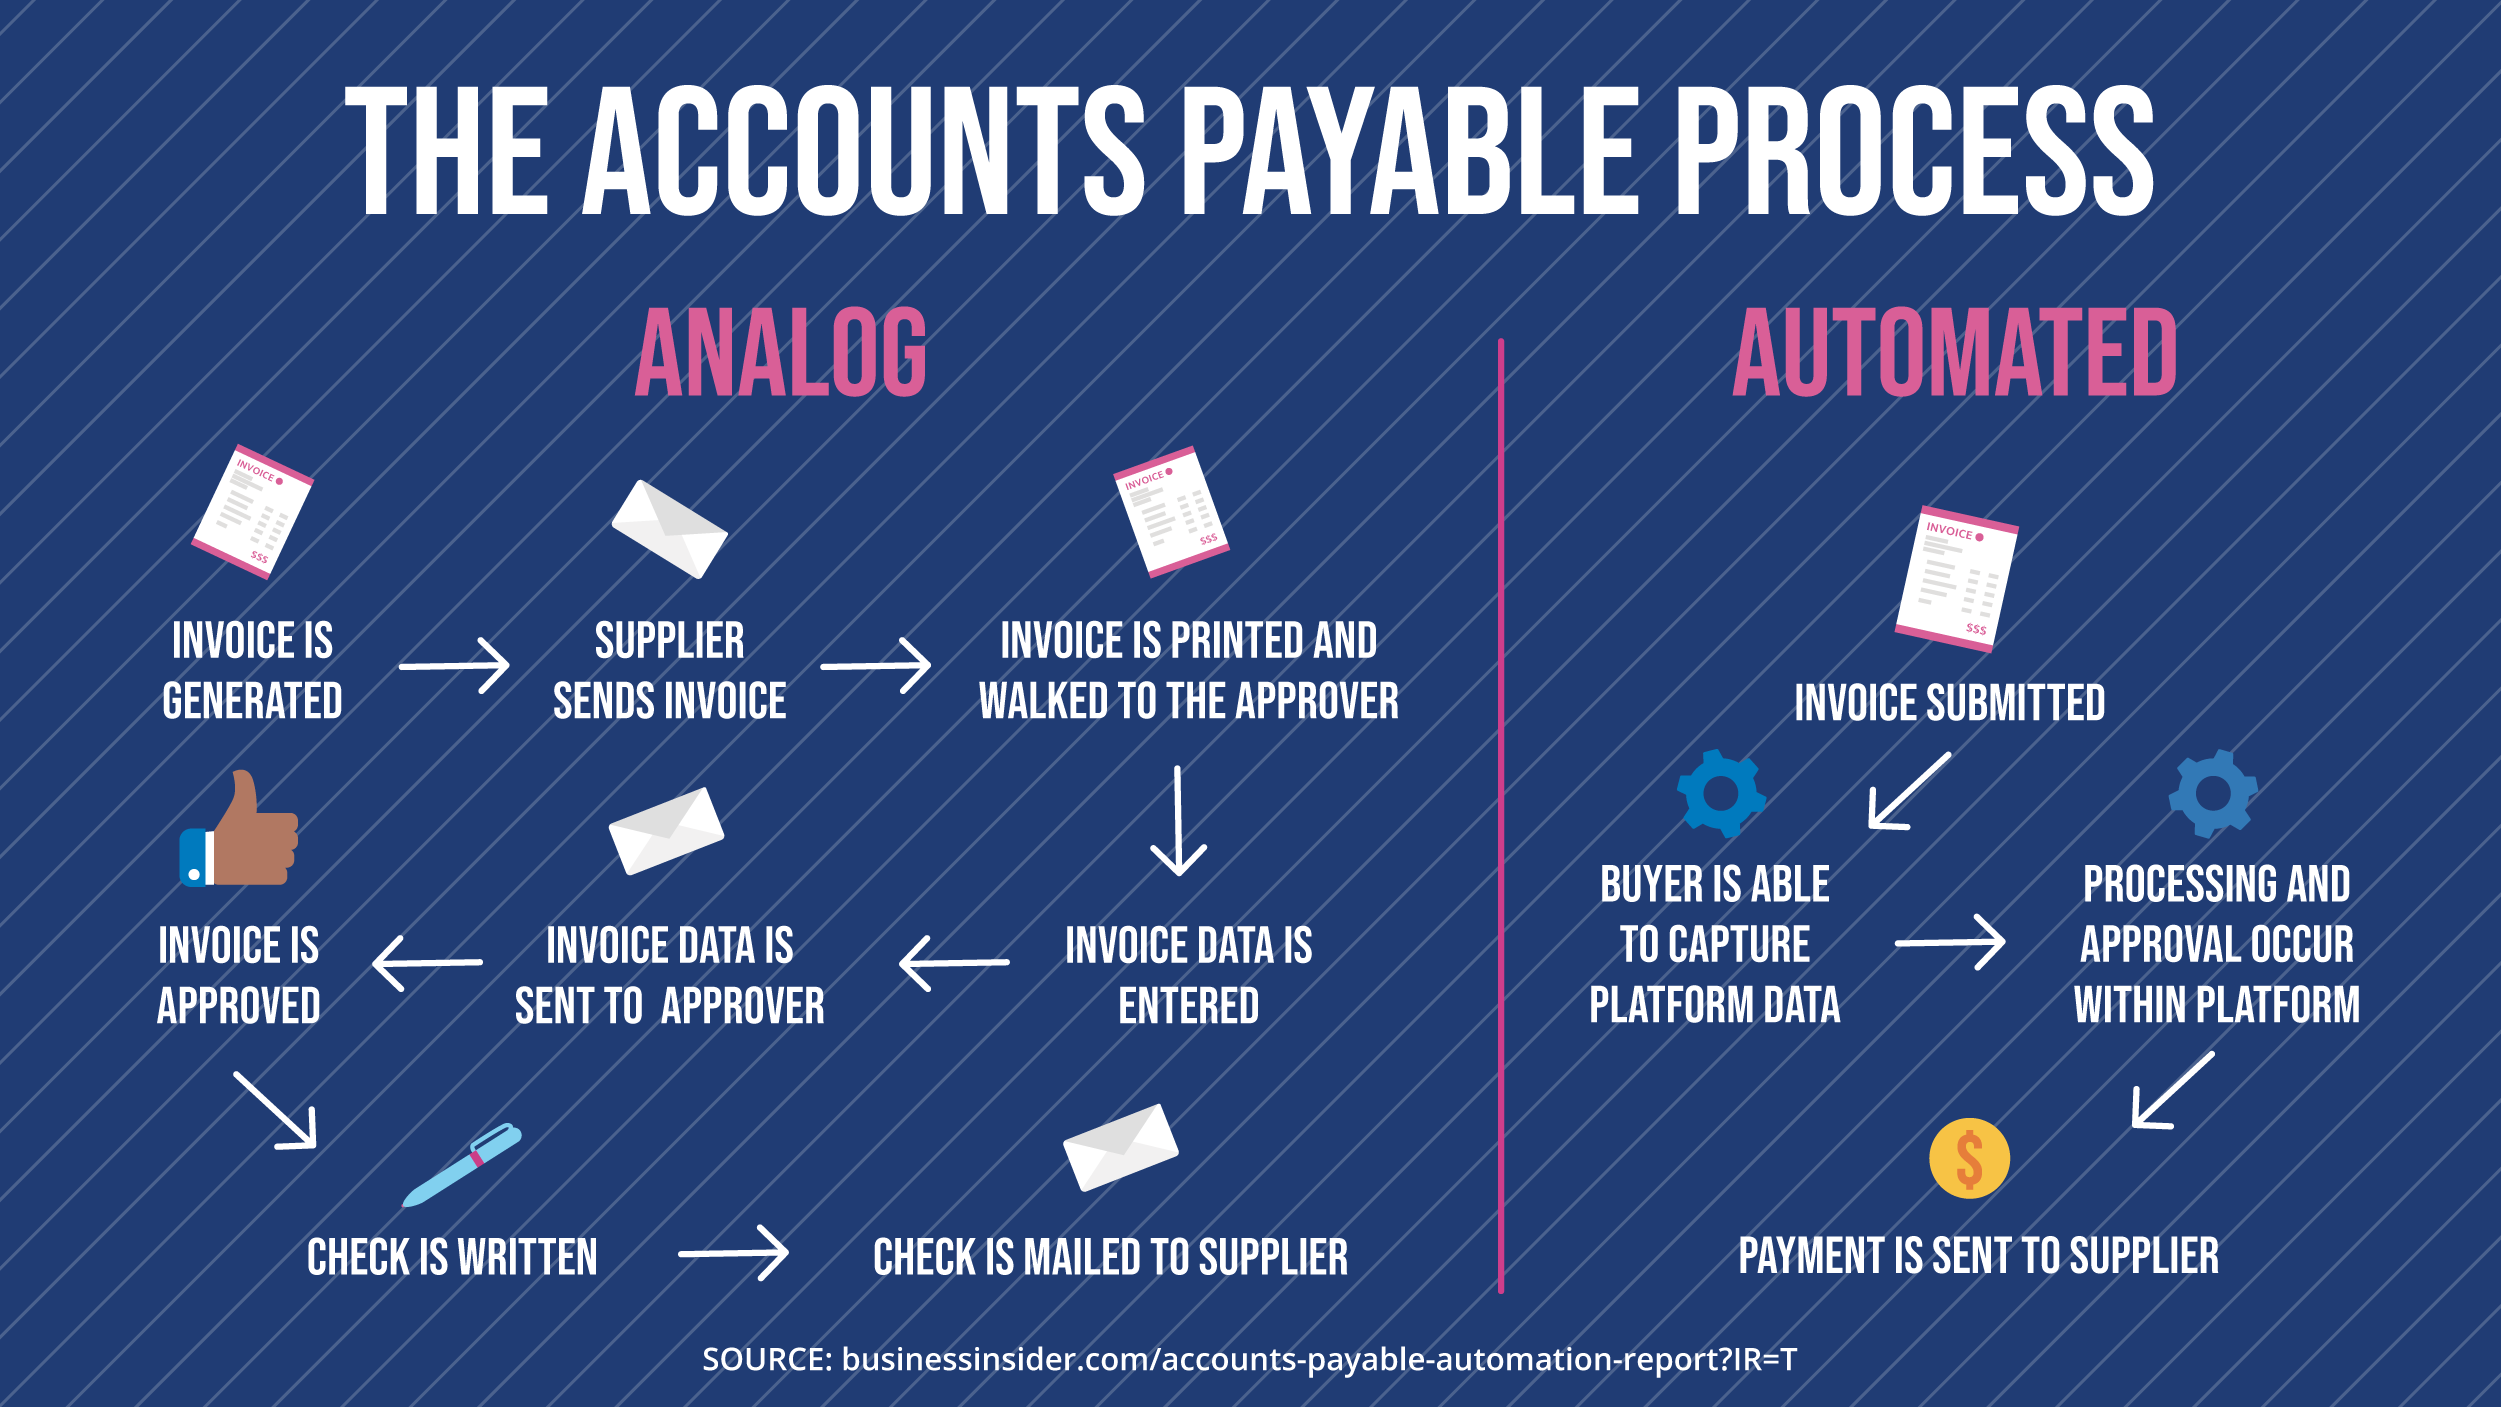 Invoice Processing Best Practices In Accounts Payable